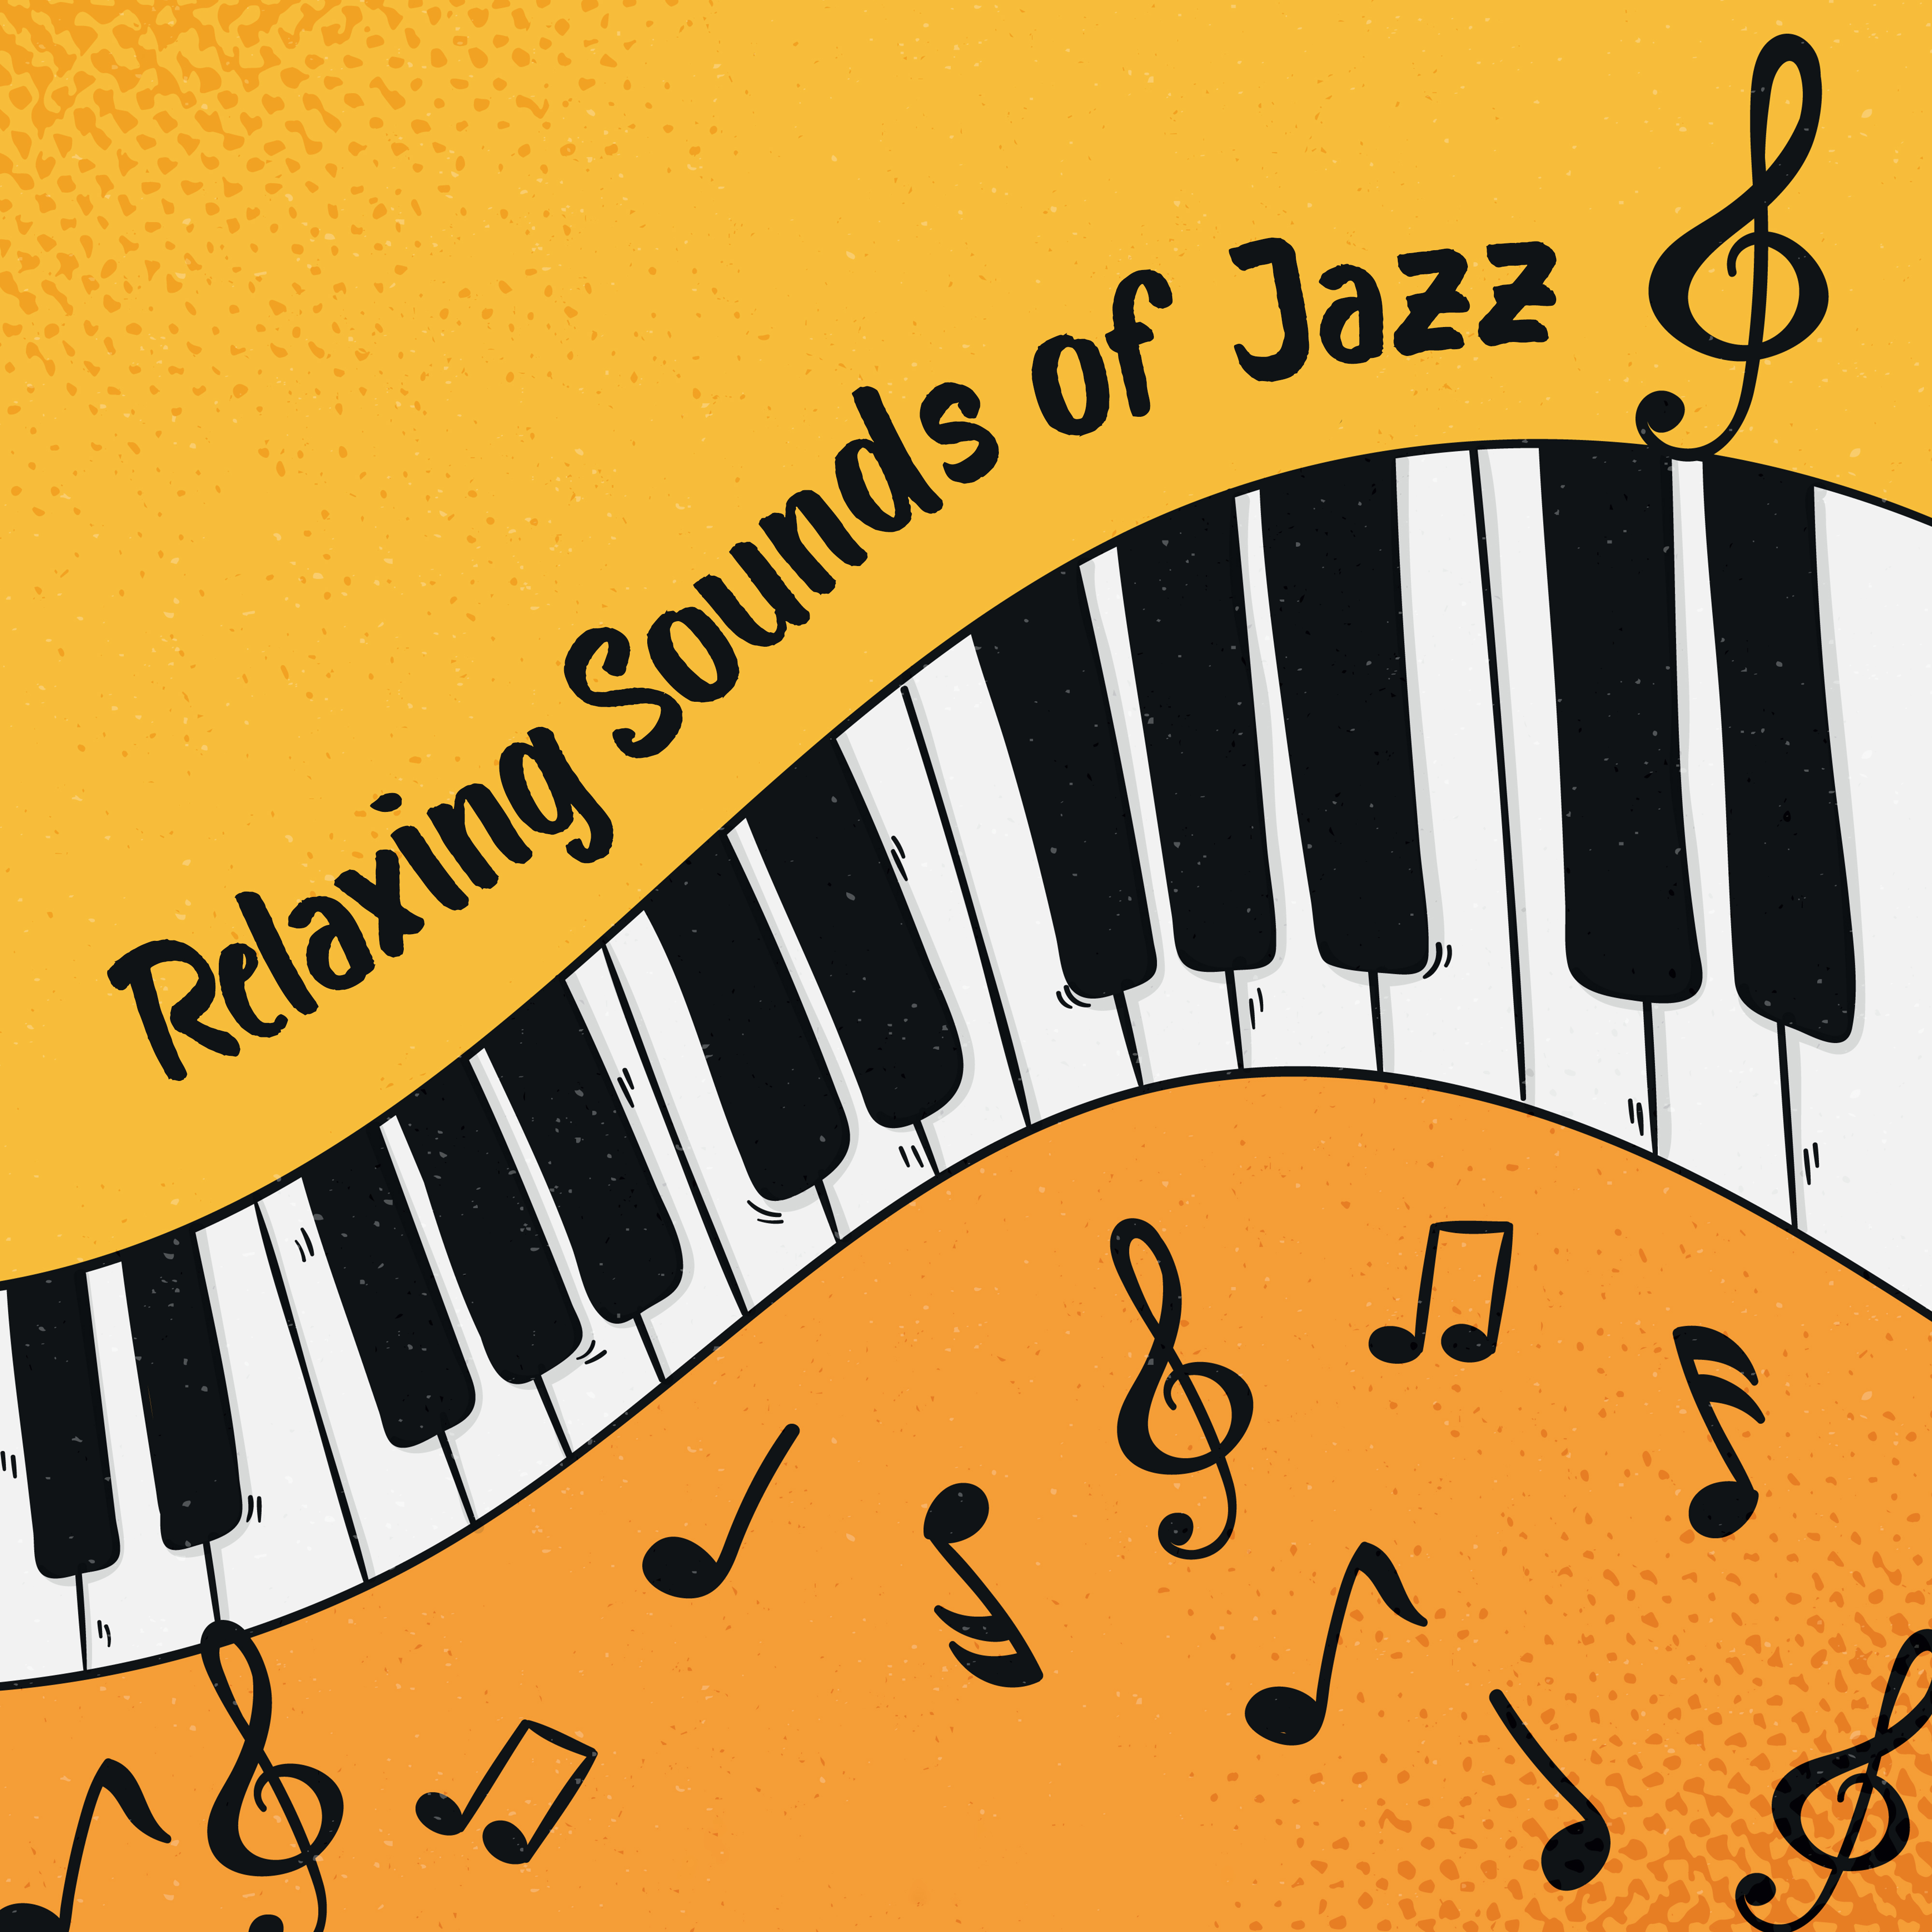 Relaxing Sounds of Jazz